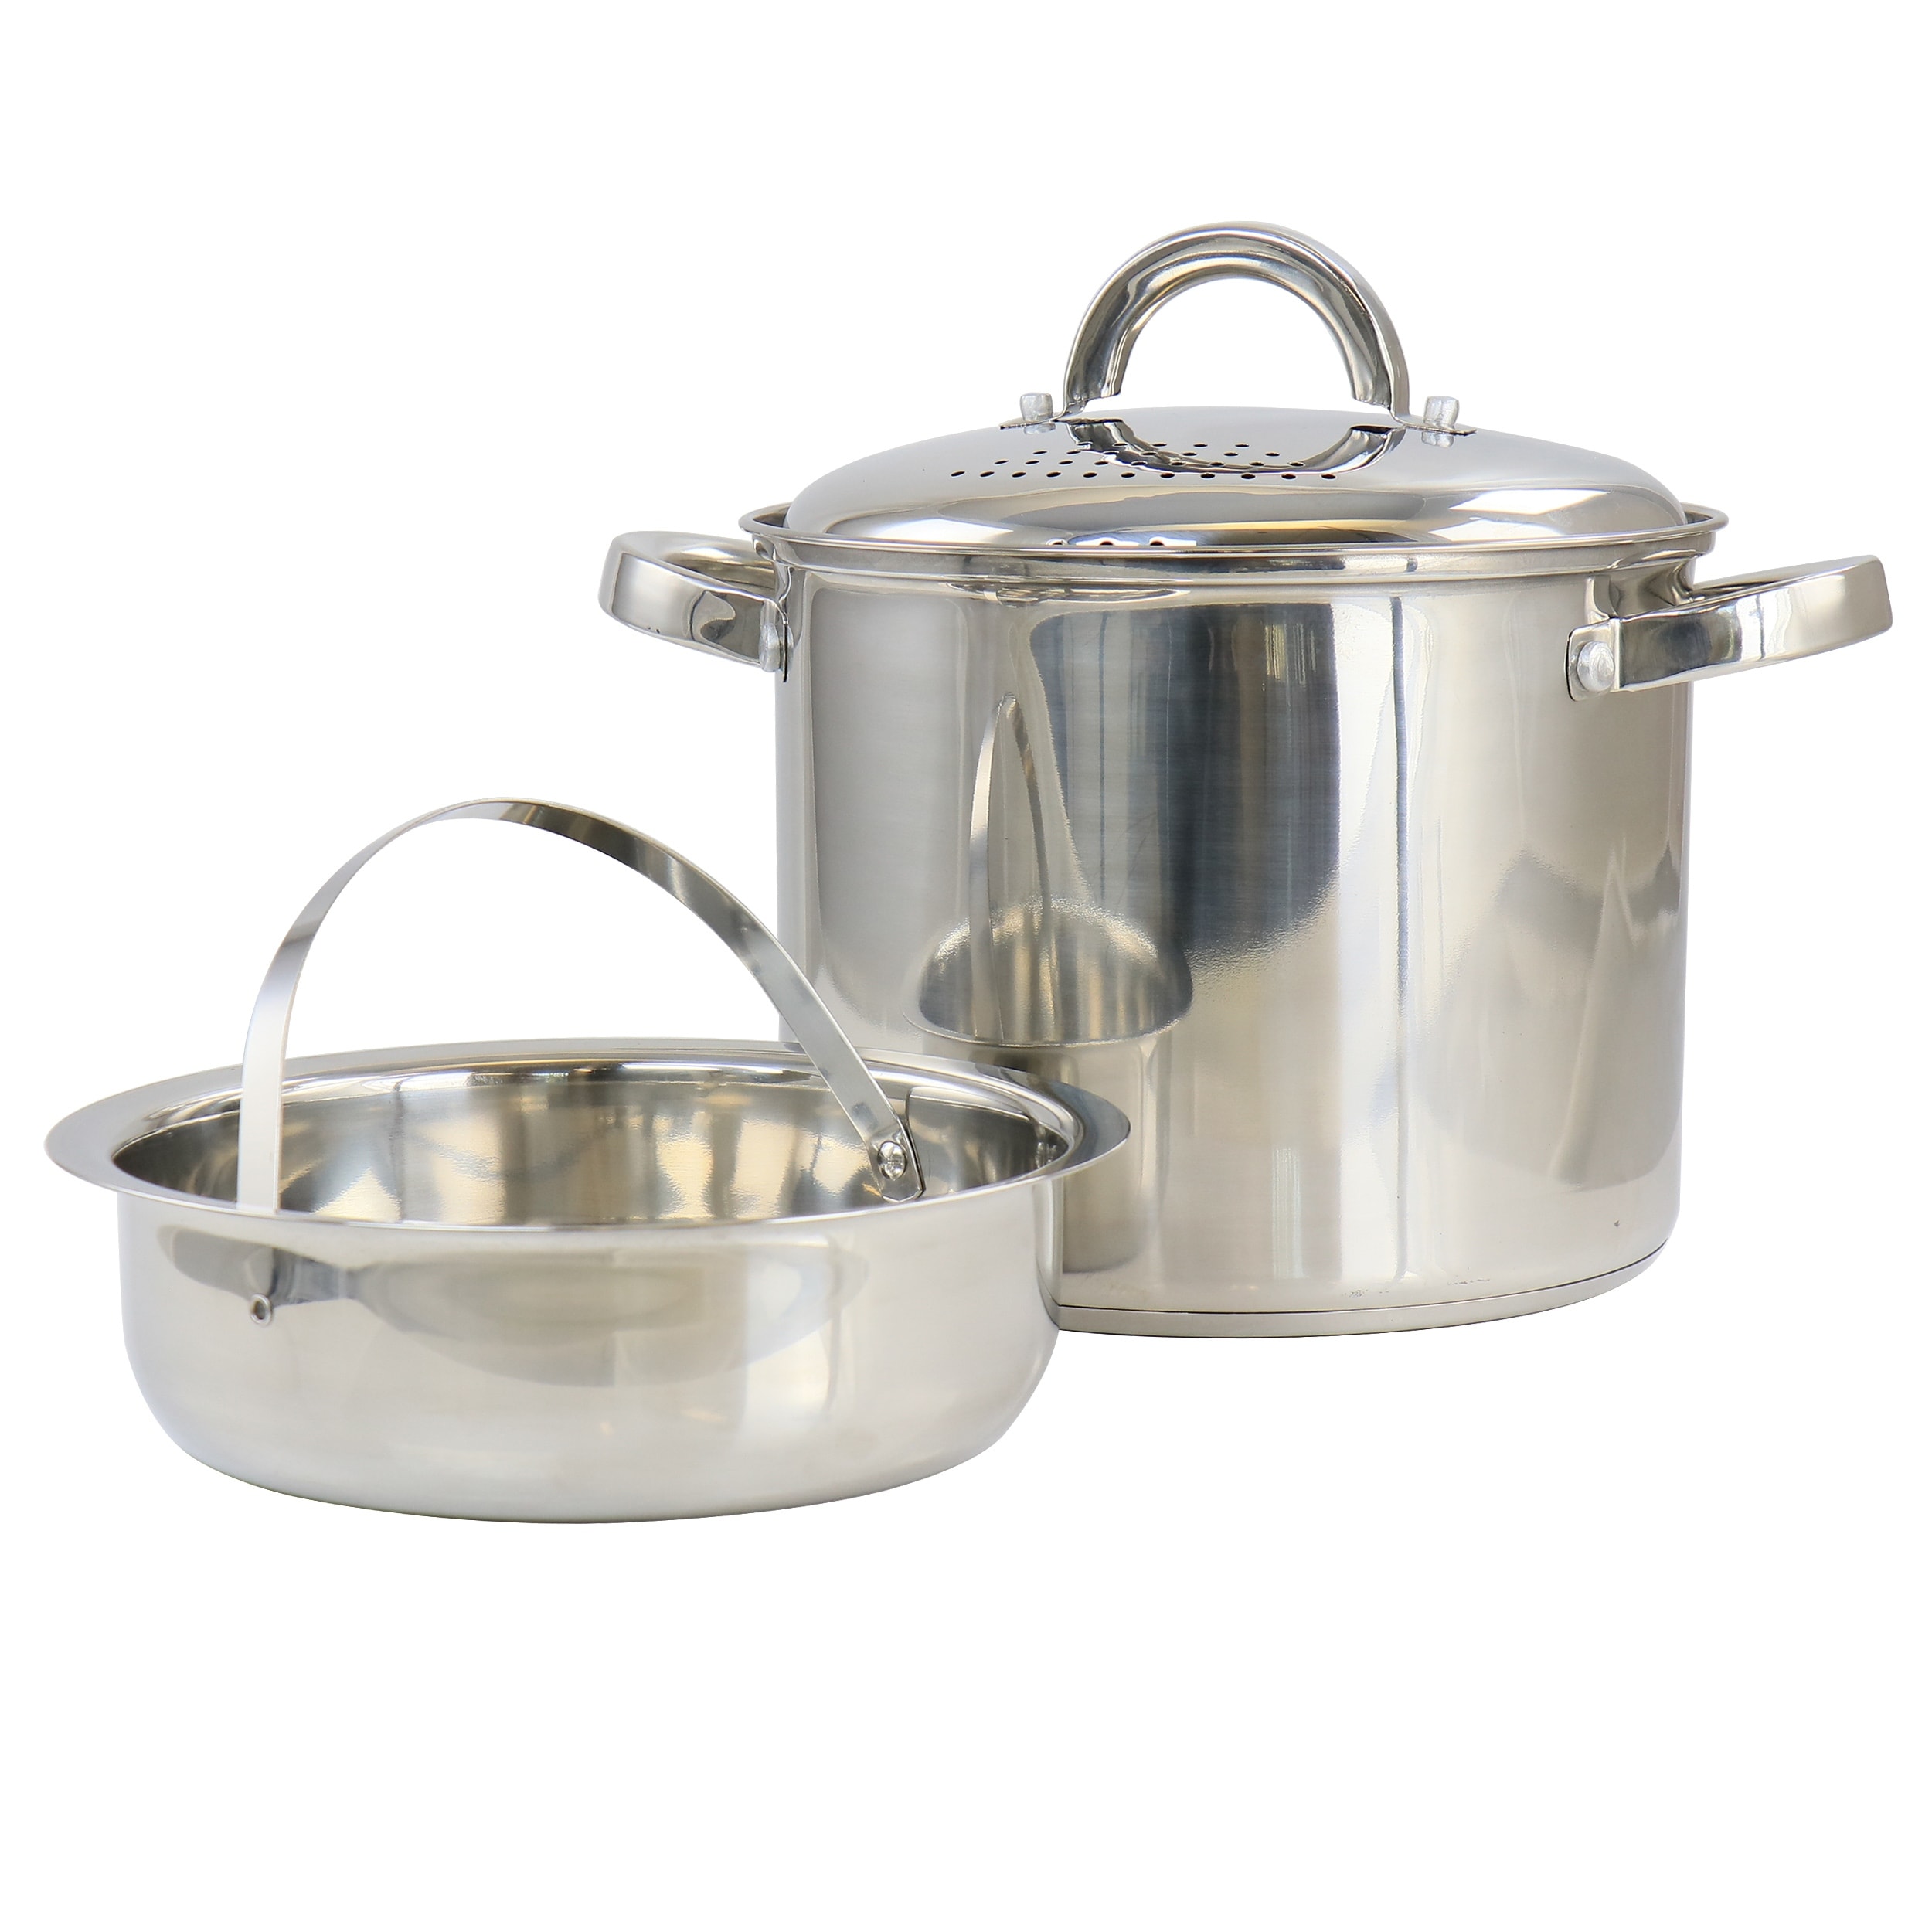 https://ak1.ostkcdn.com/images/products/is/images/direct/1fb34e9c310a2f3bc04380186aeb66bf68e1cfdd/20-cup-Stainless-Steel-Pasta-Pot-with-Strainer-Lid-and-Steamer-Insert.jpg